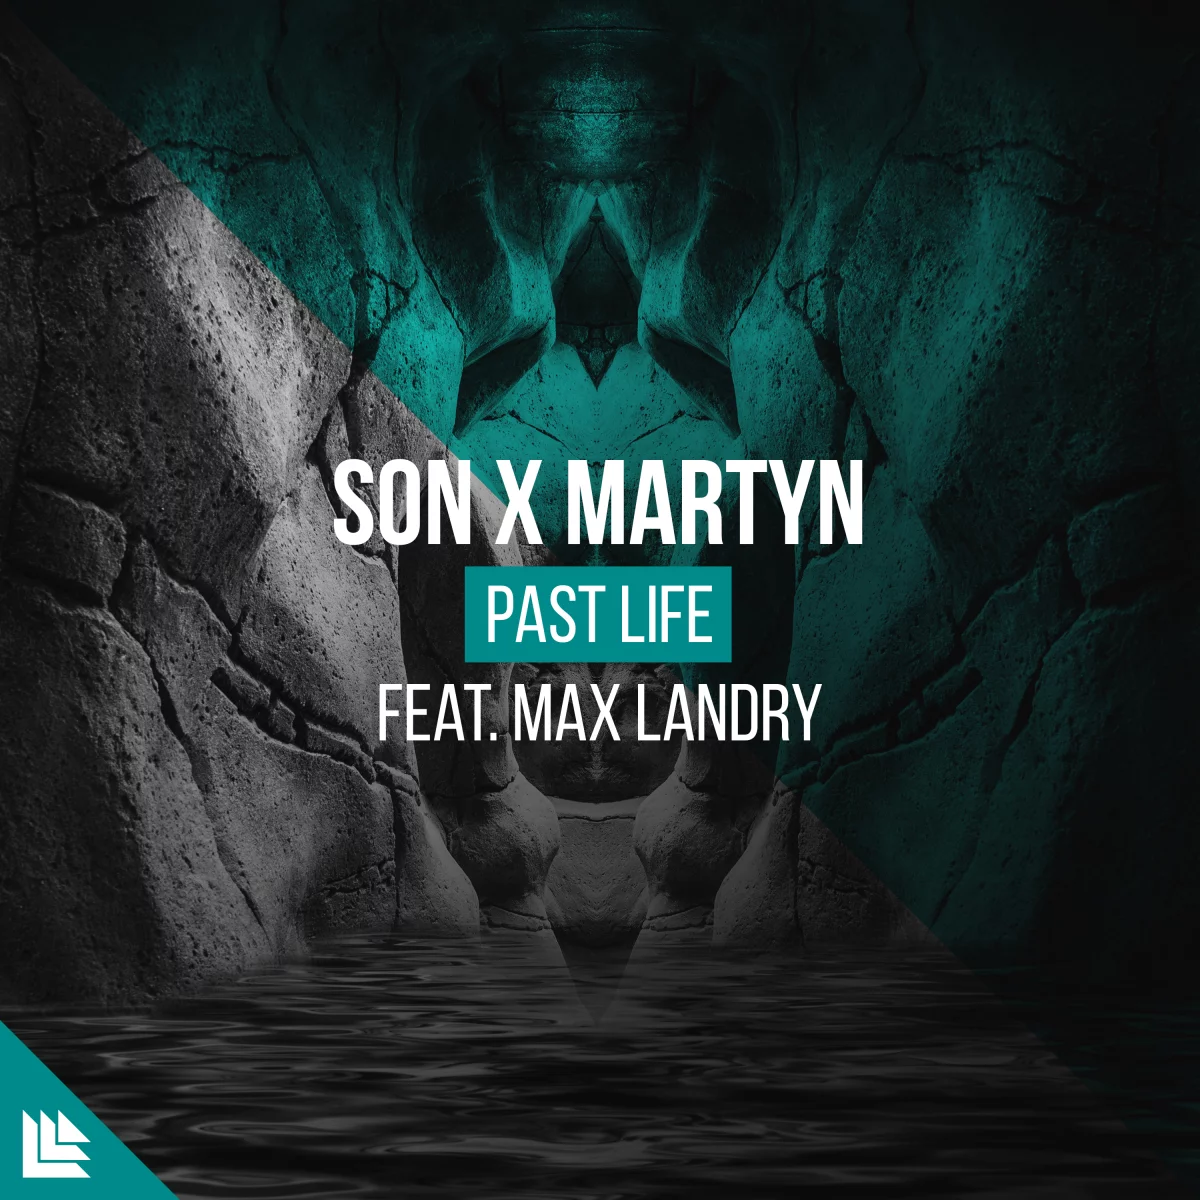 Past Life - SON OFFICIAL⁠ Martyn⁠ Max Landry⁠ 